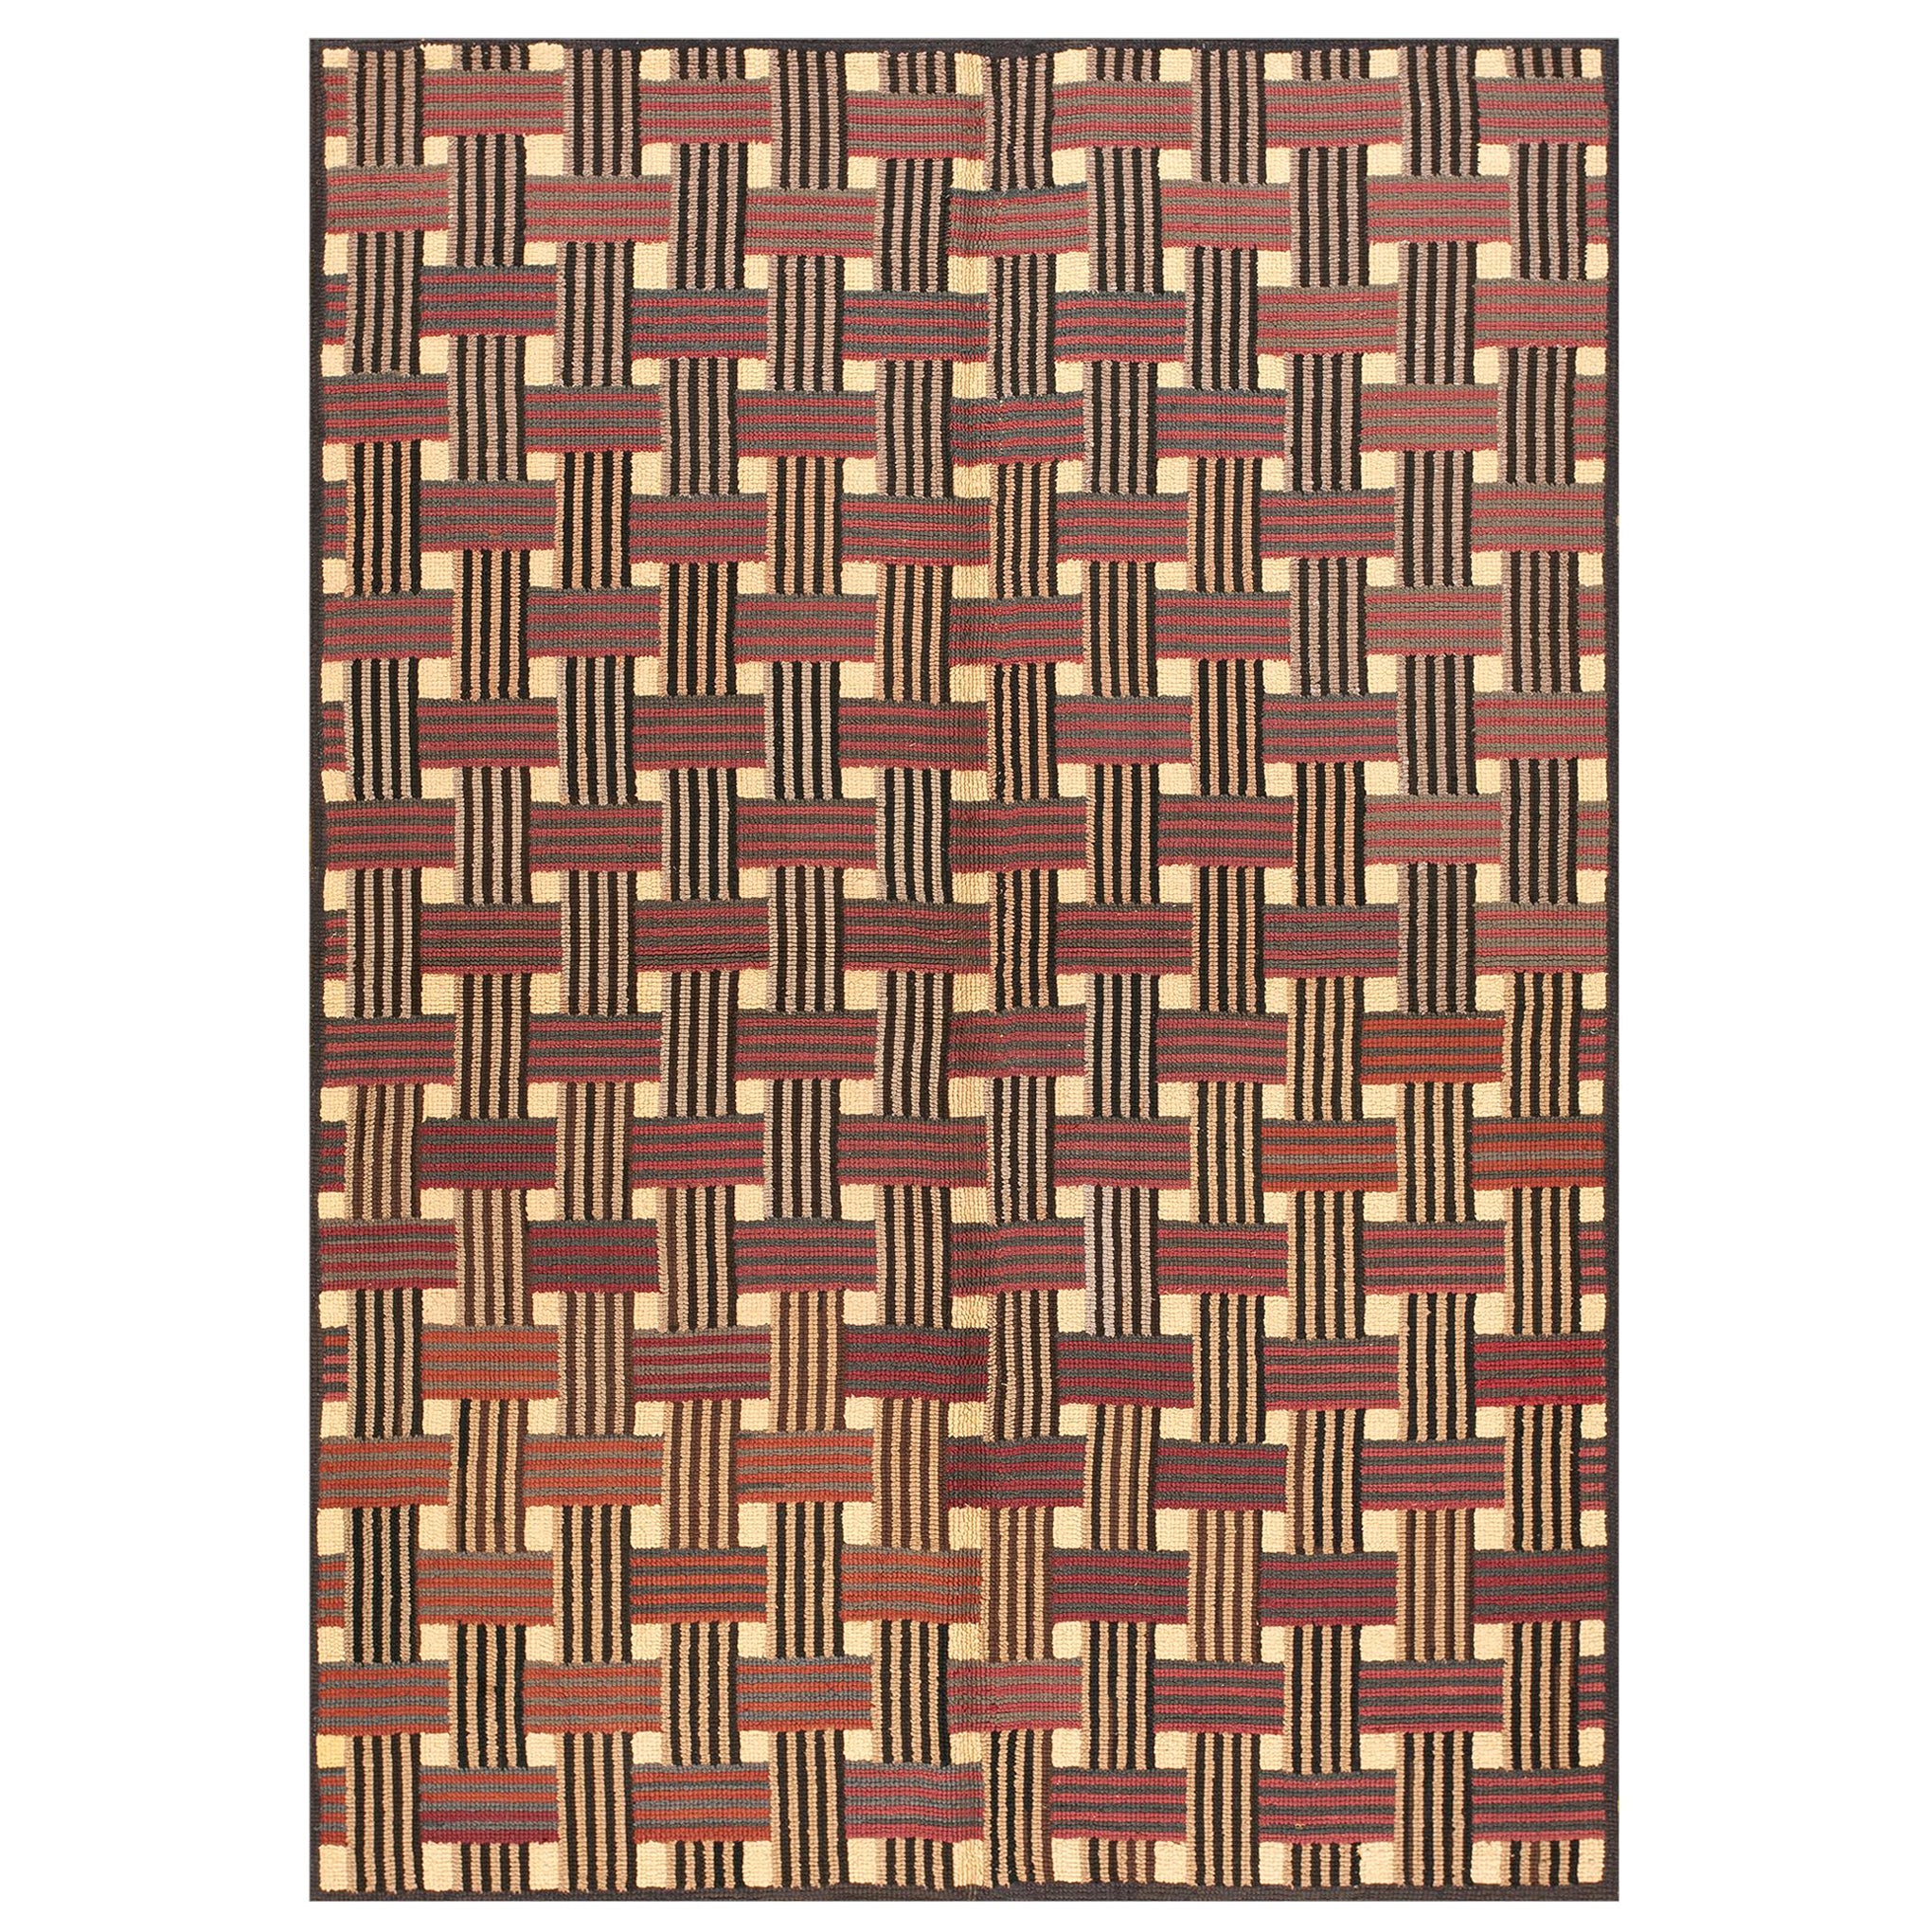 Mid 20th Century American Hooked Rug ( 6'2" x 8'8" - 188 x 265 cm )